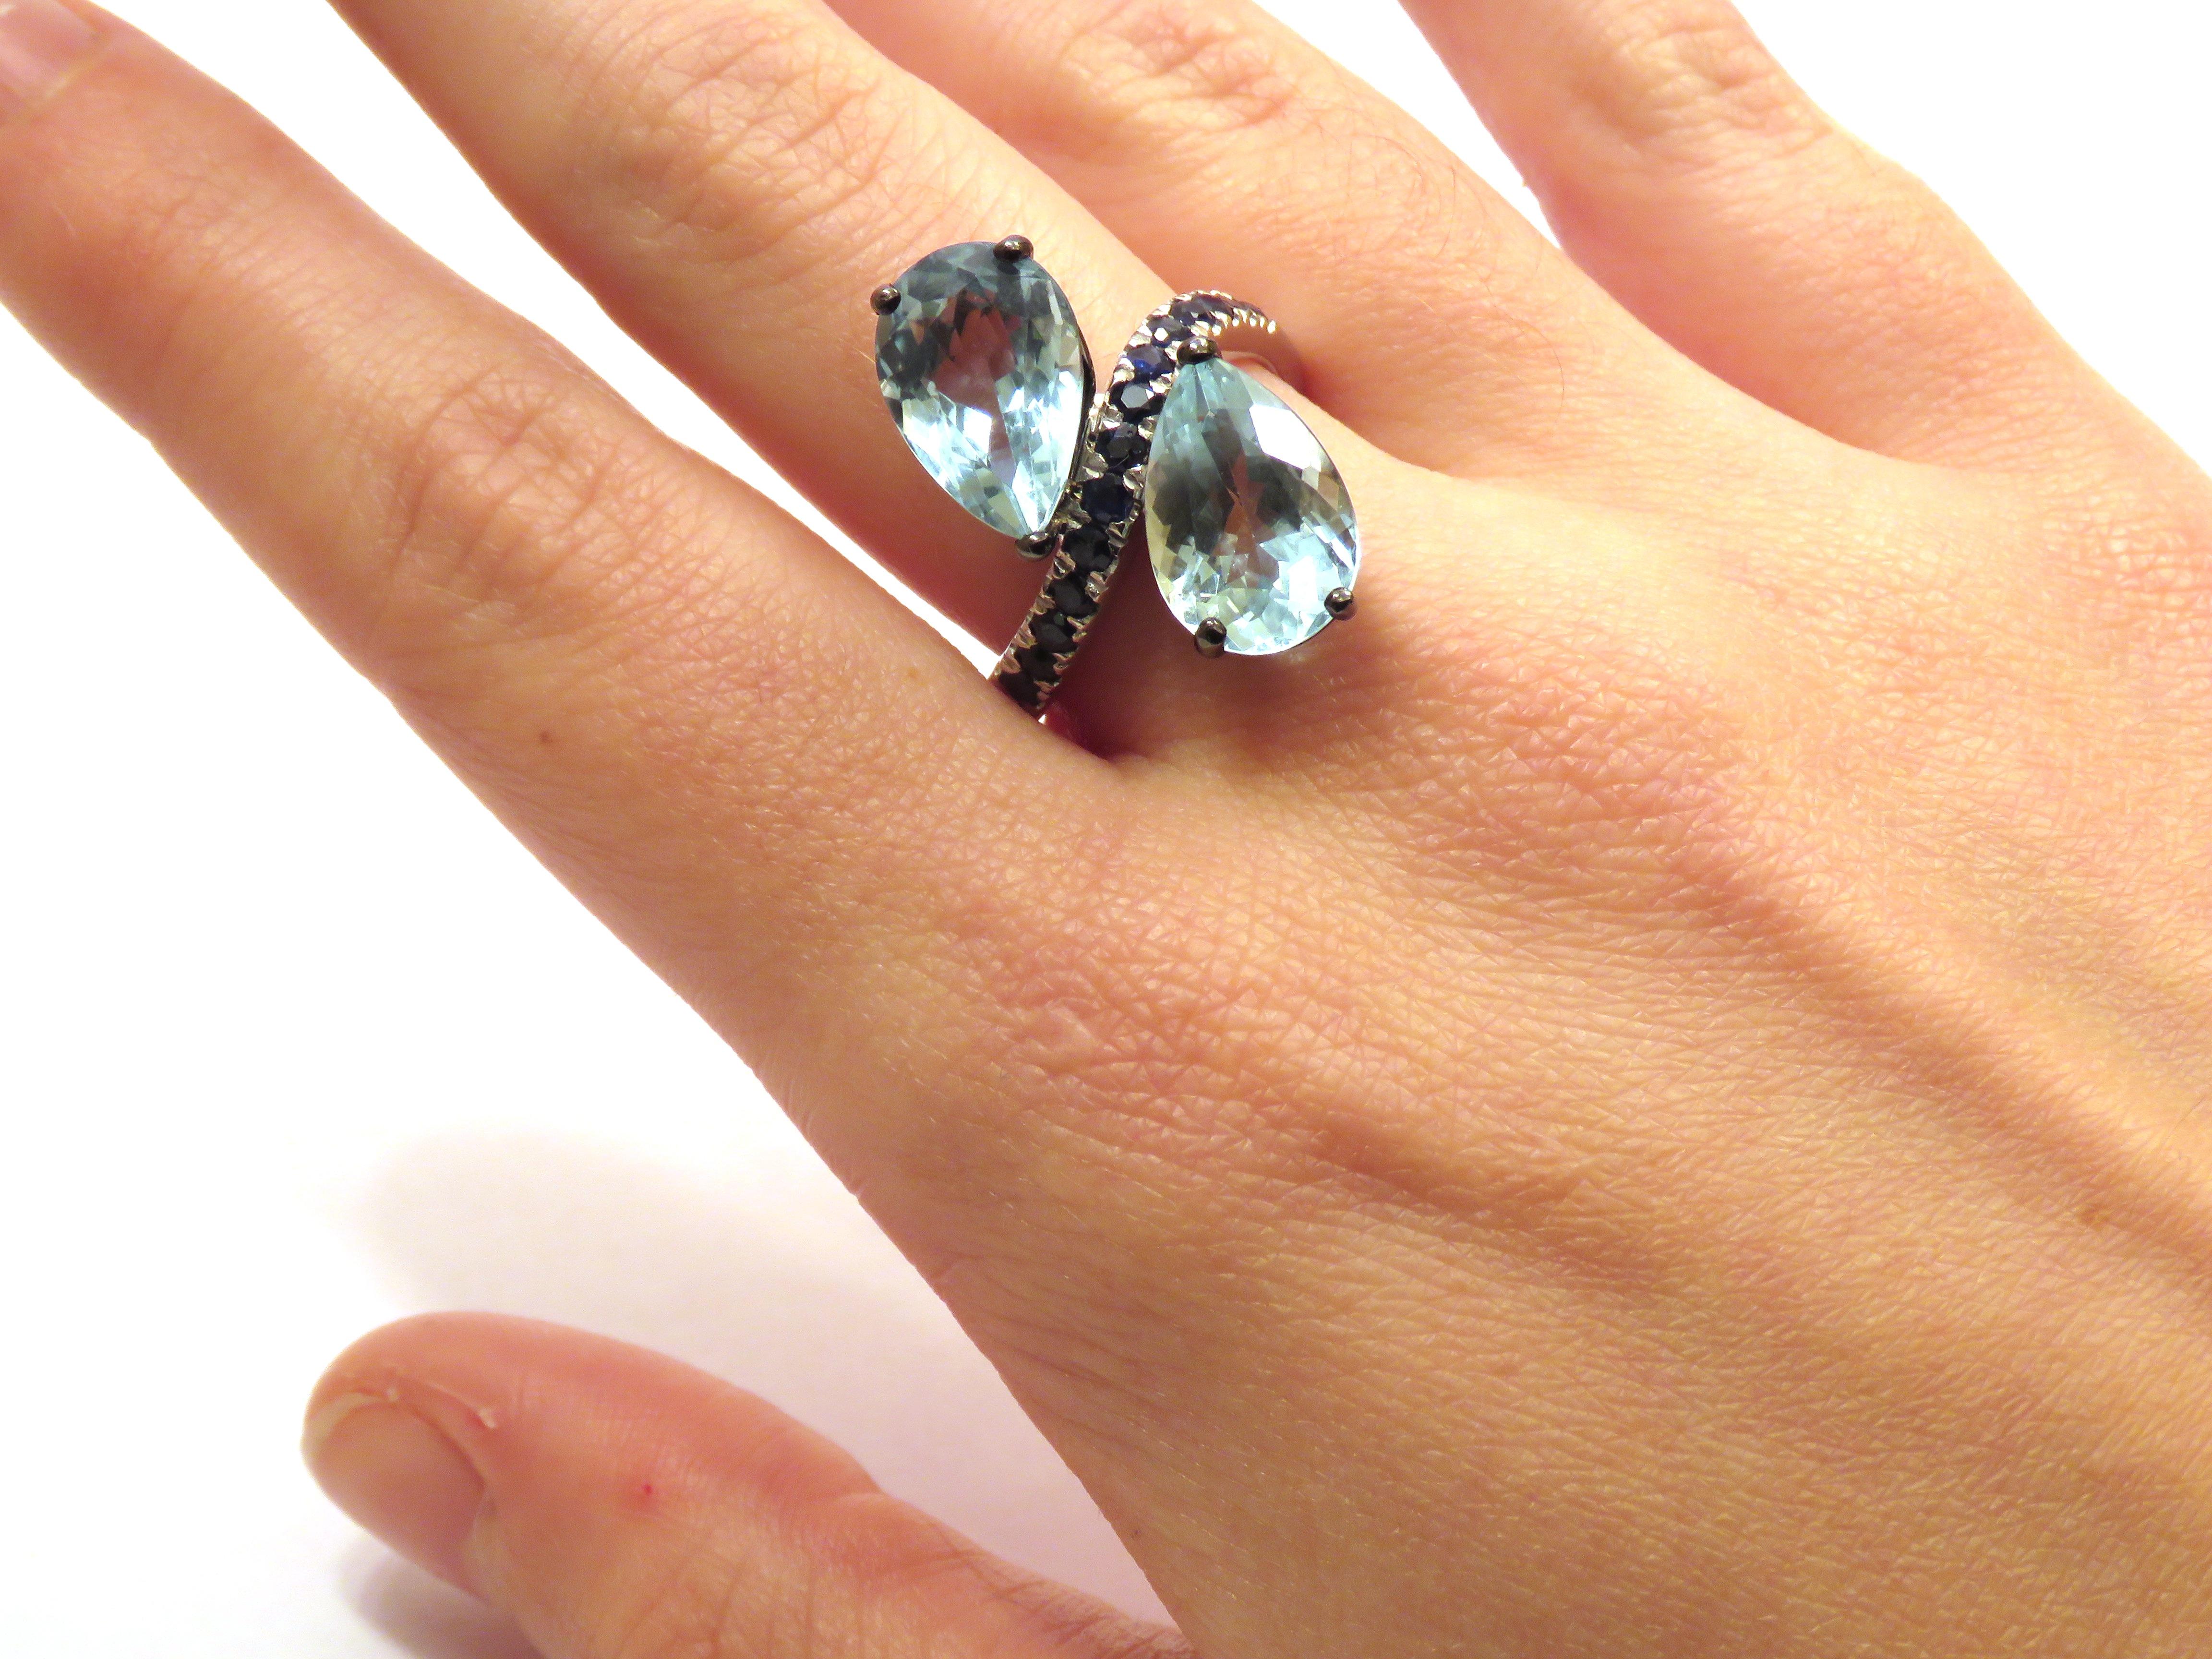 18 karat white gold cocktail ring with two natural aquamarine gemstones 7,40 ctw and sapphires 0,45 ctw. The finger size is: US 7 / Italian 14 / French 54. The ring can be resized on customer's request before shipment. It is handmade by Botta